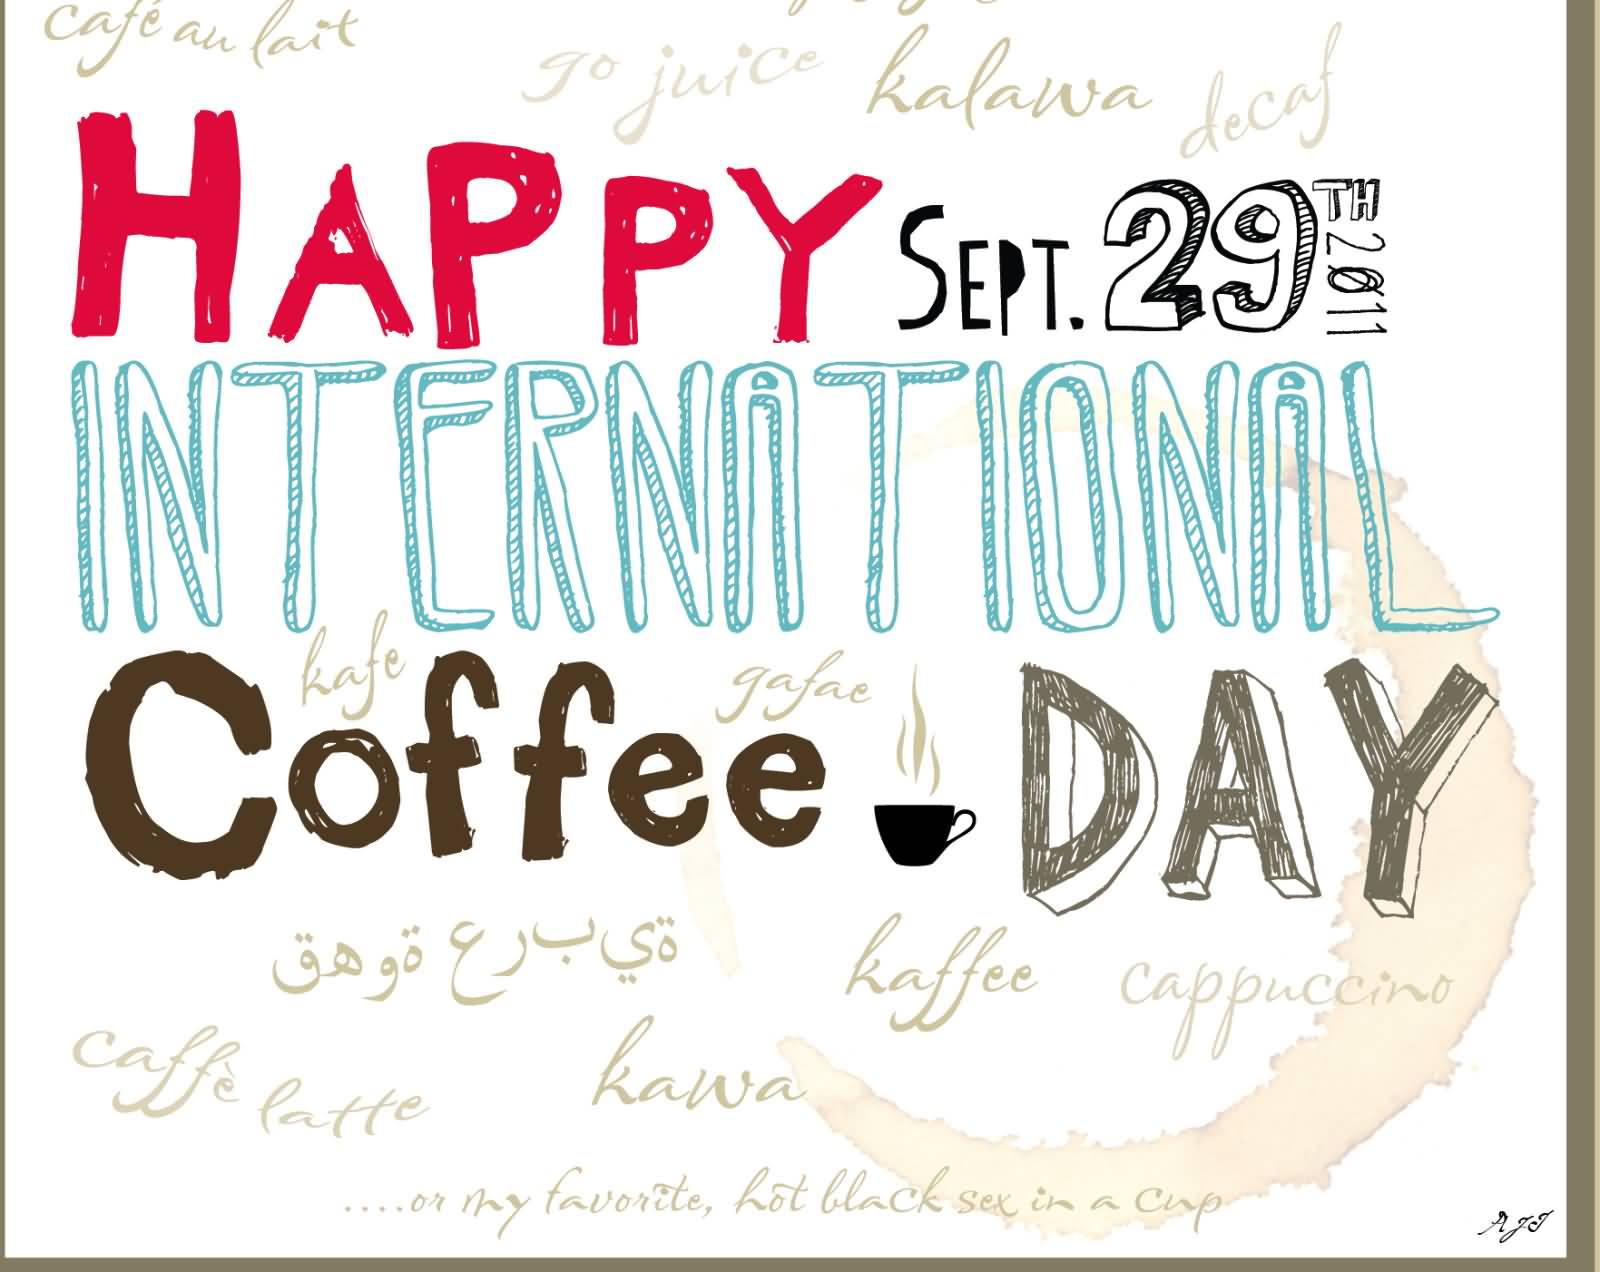 Happy International Coffee Day September 29 Hand Made Poster